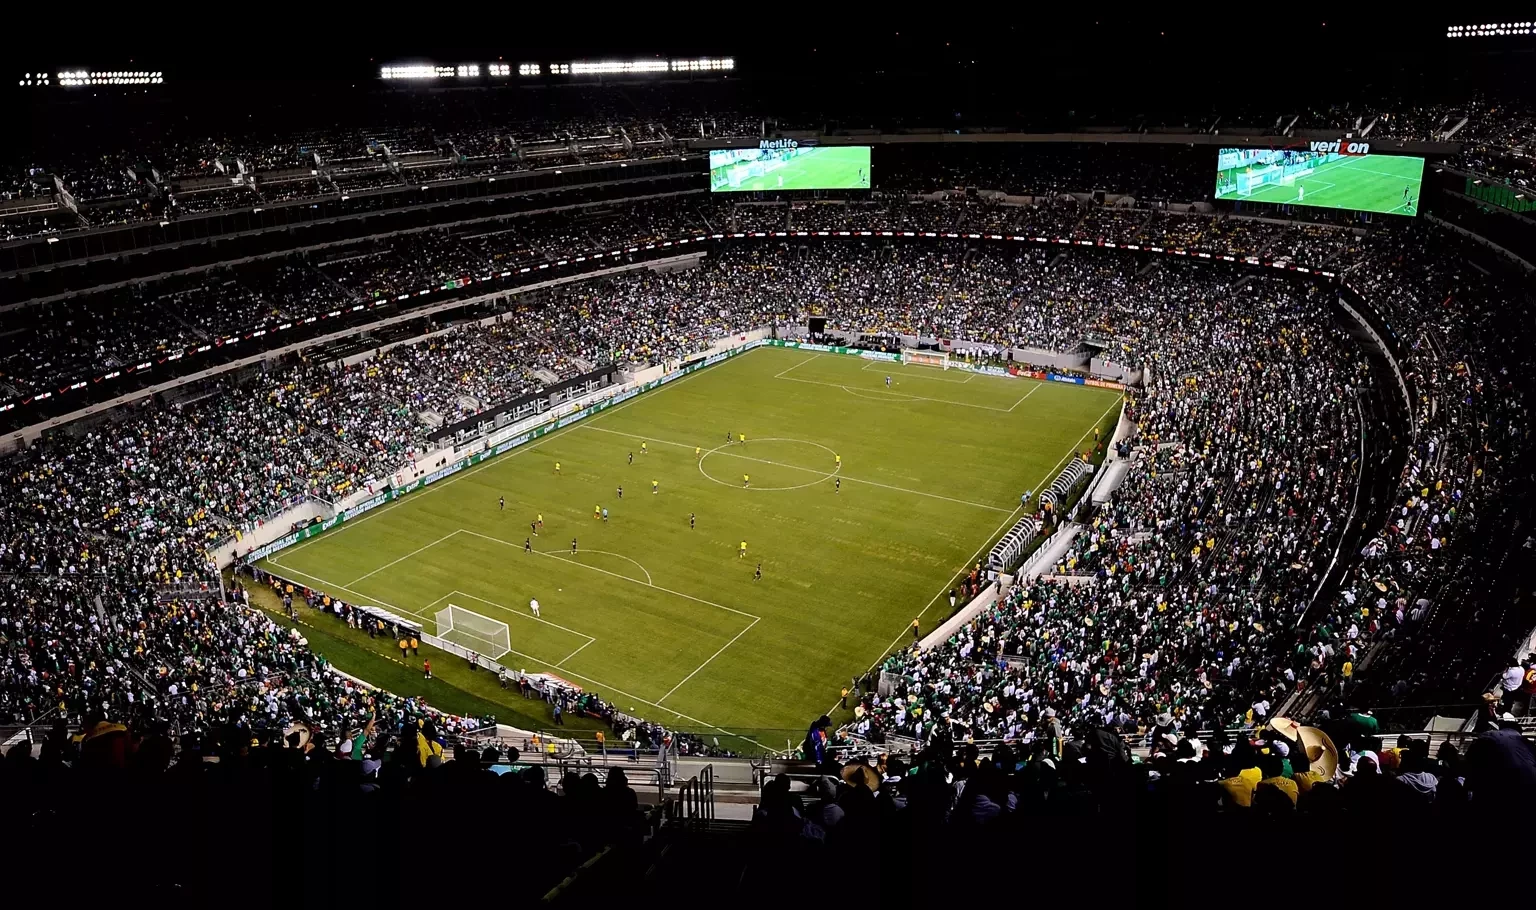 Metlife Stadium, New Jersey to host 2026 FIFA World Cup final